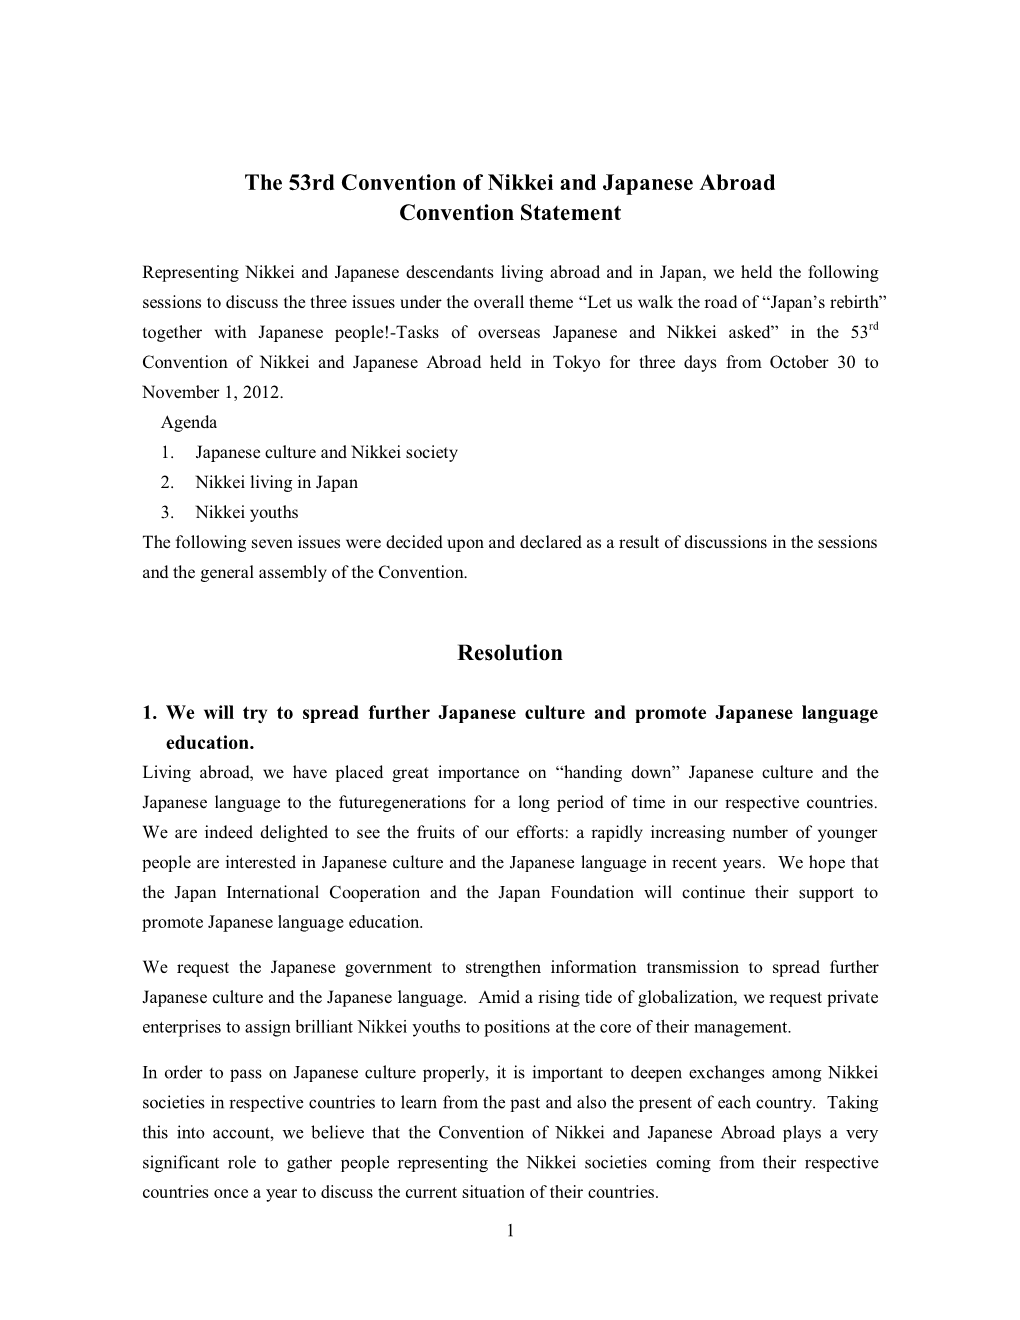 The 53Rd Convention of Nikkei and Japanese Abroad Convention Statement